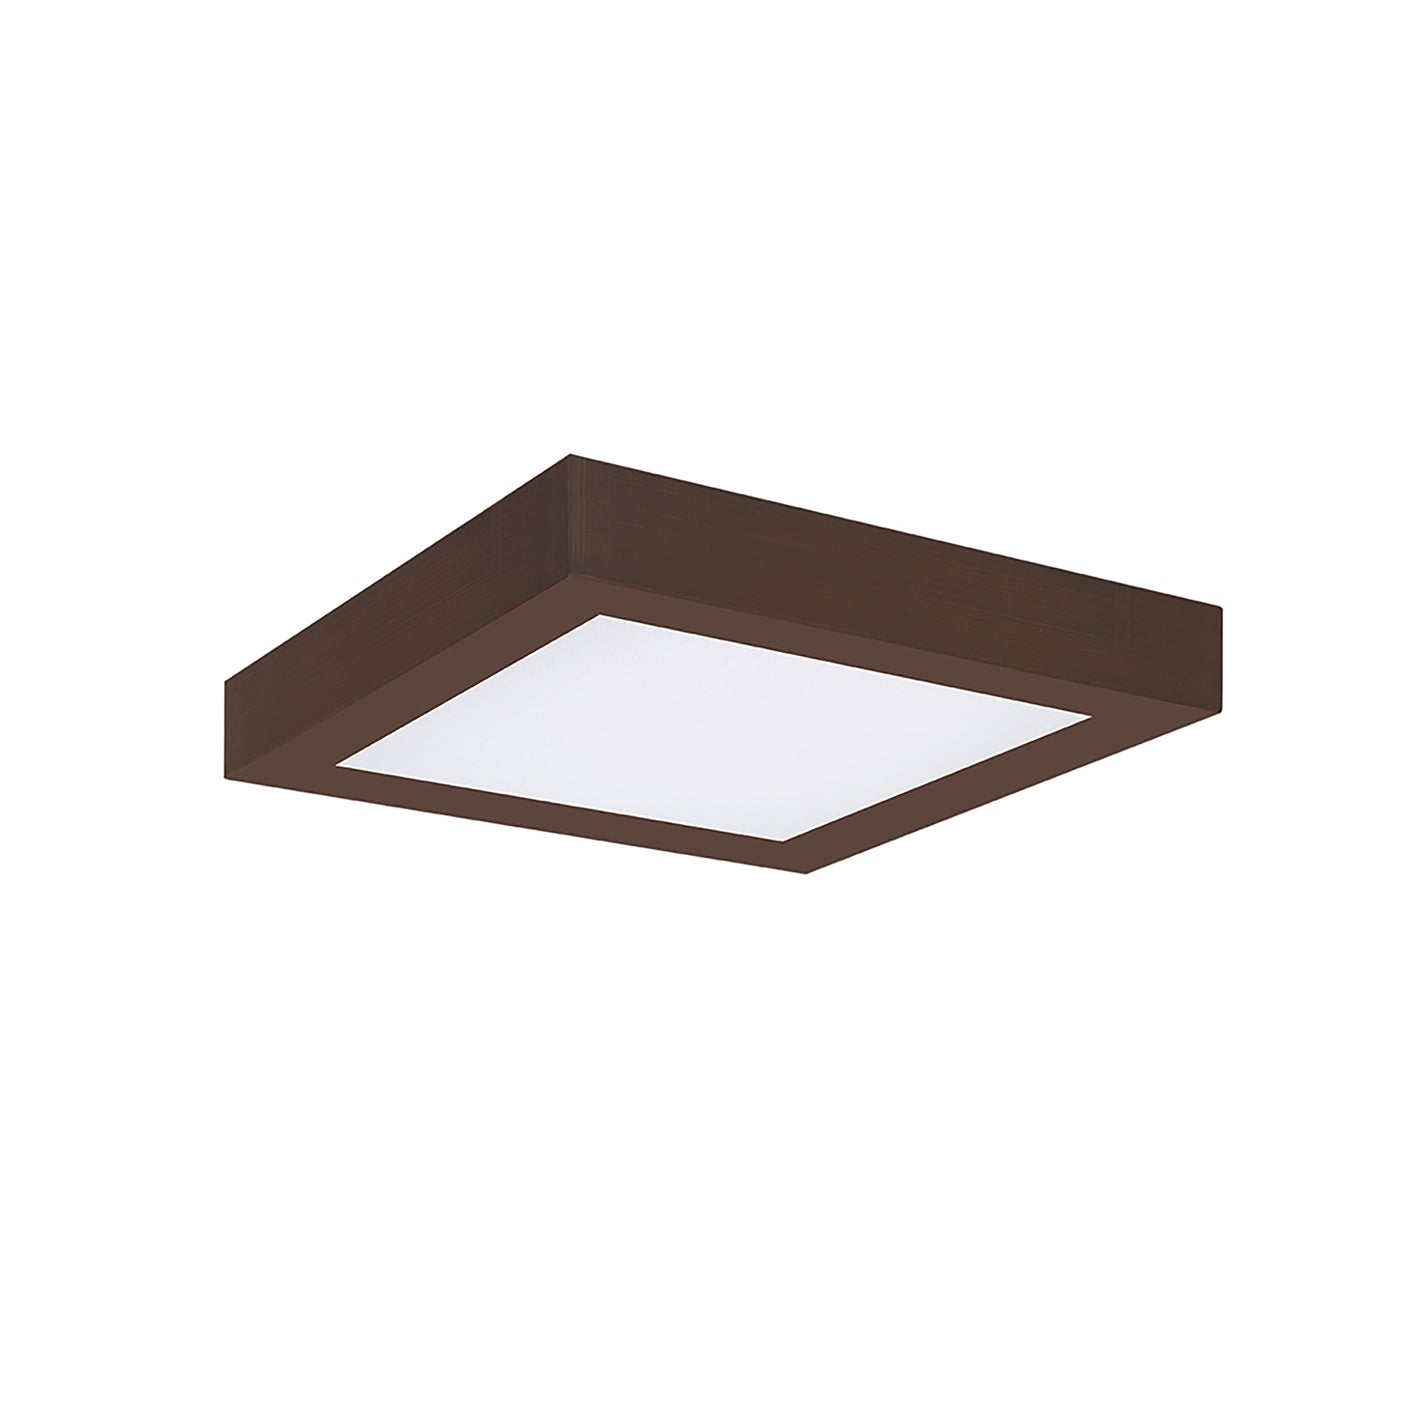 7 Inch Square 5CCT Color Selectable Surface Mount Panel Light Fixture, Bronze Finish